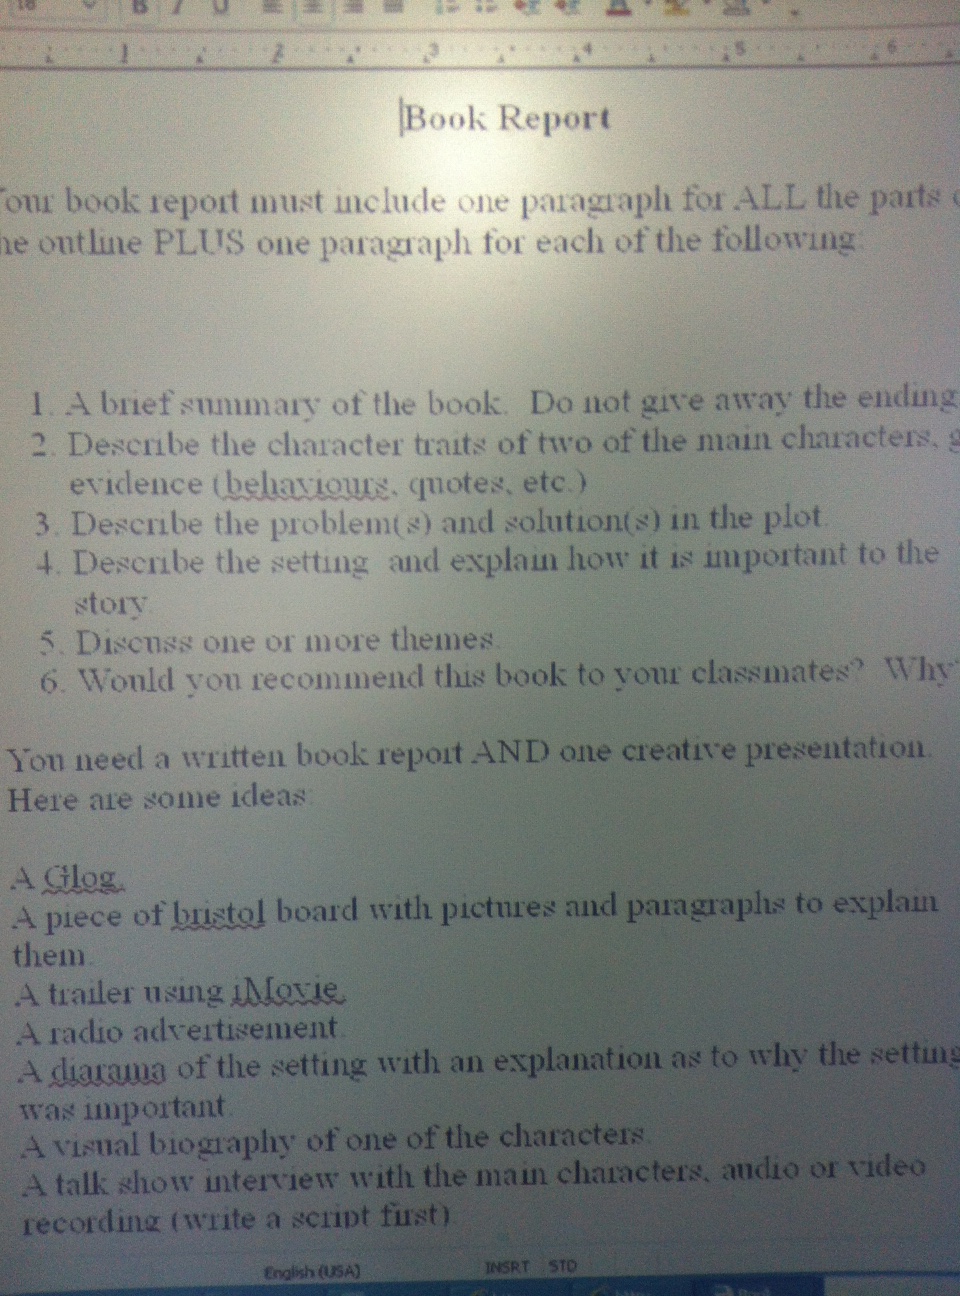 Main parts of book report